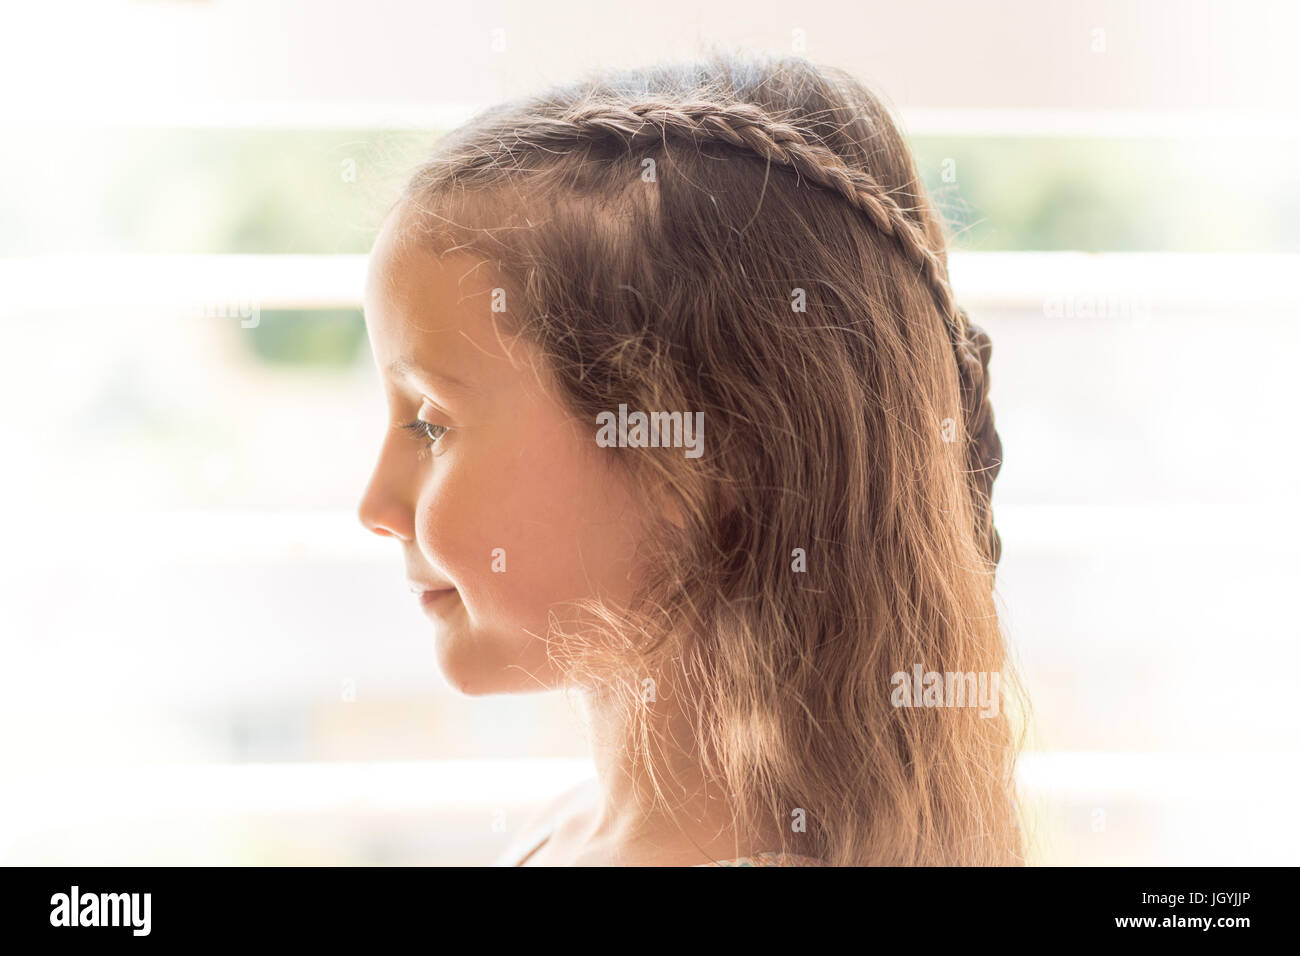 High-key portrait of girl with braided hair. Child with long brown with hairstyle with plaits, in front of window Stock Photo